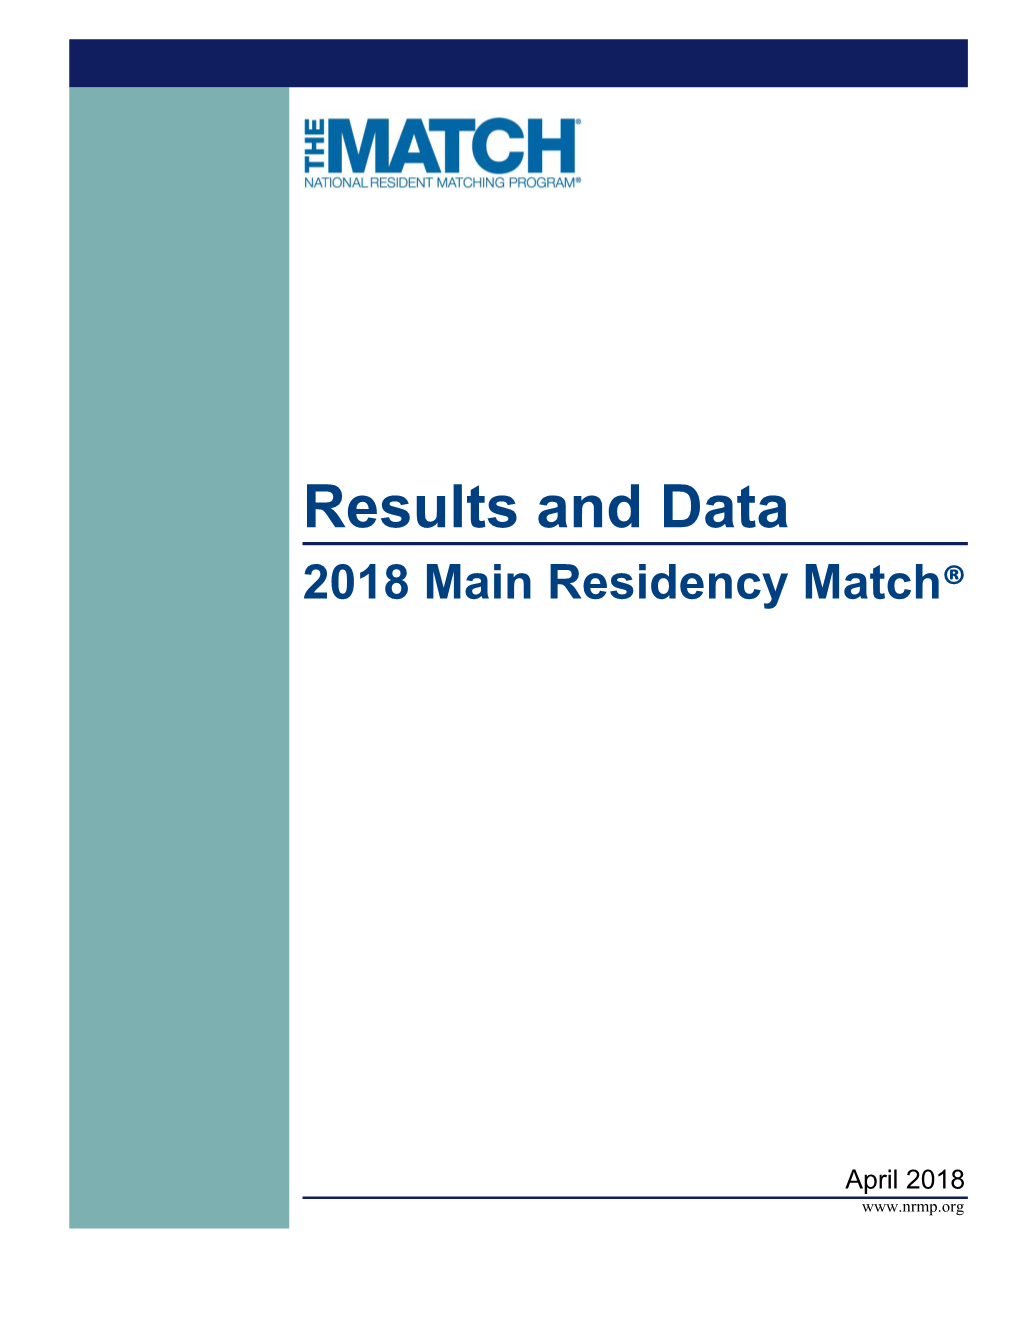 Results and Data: 2018 Main Residency Match®